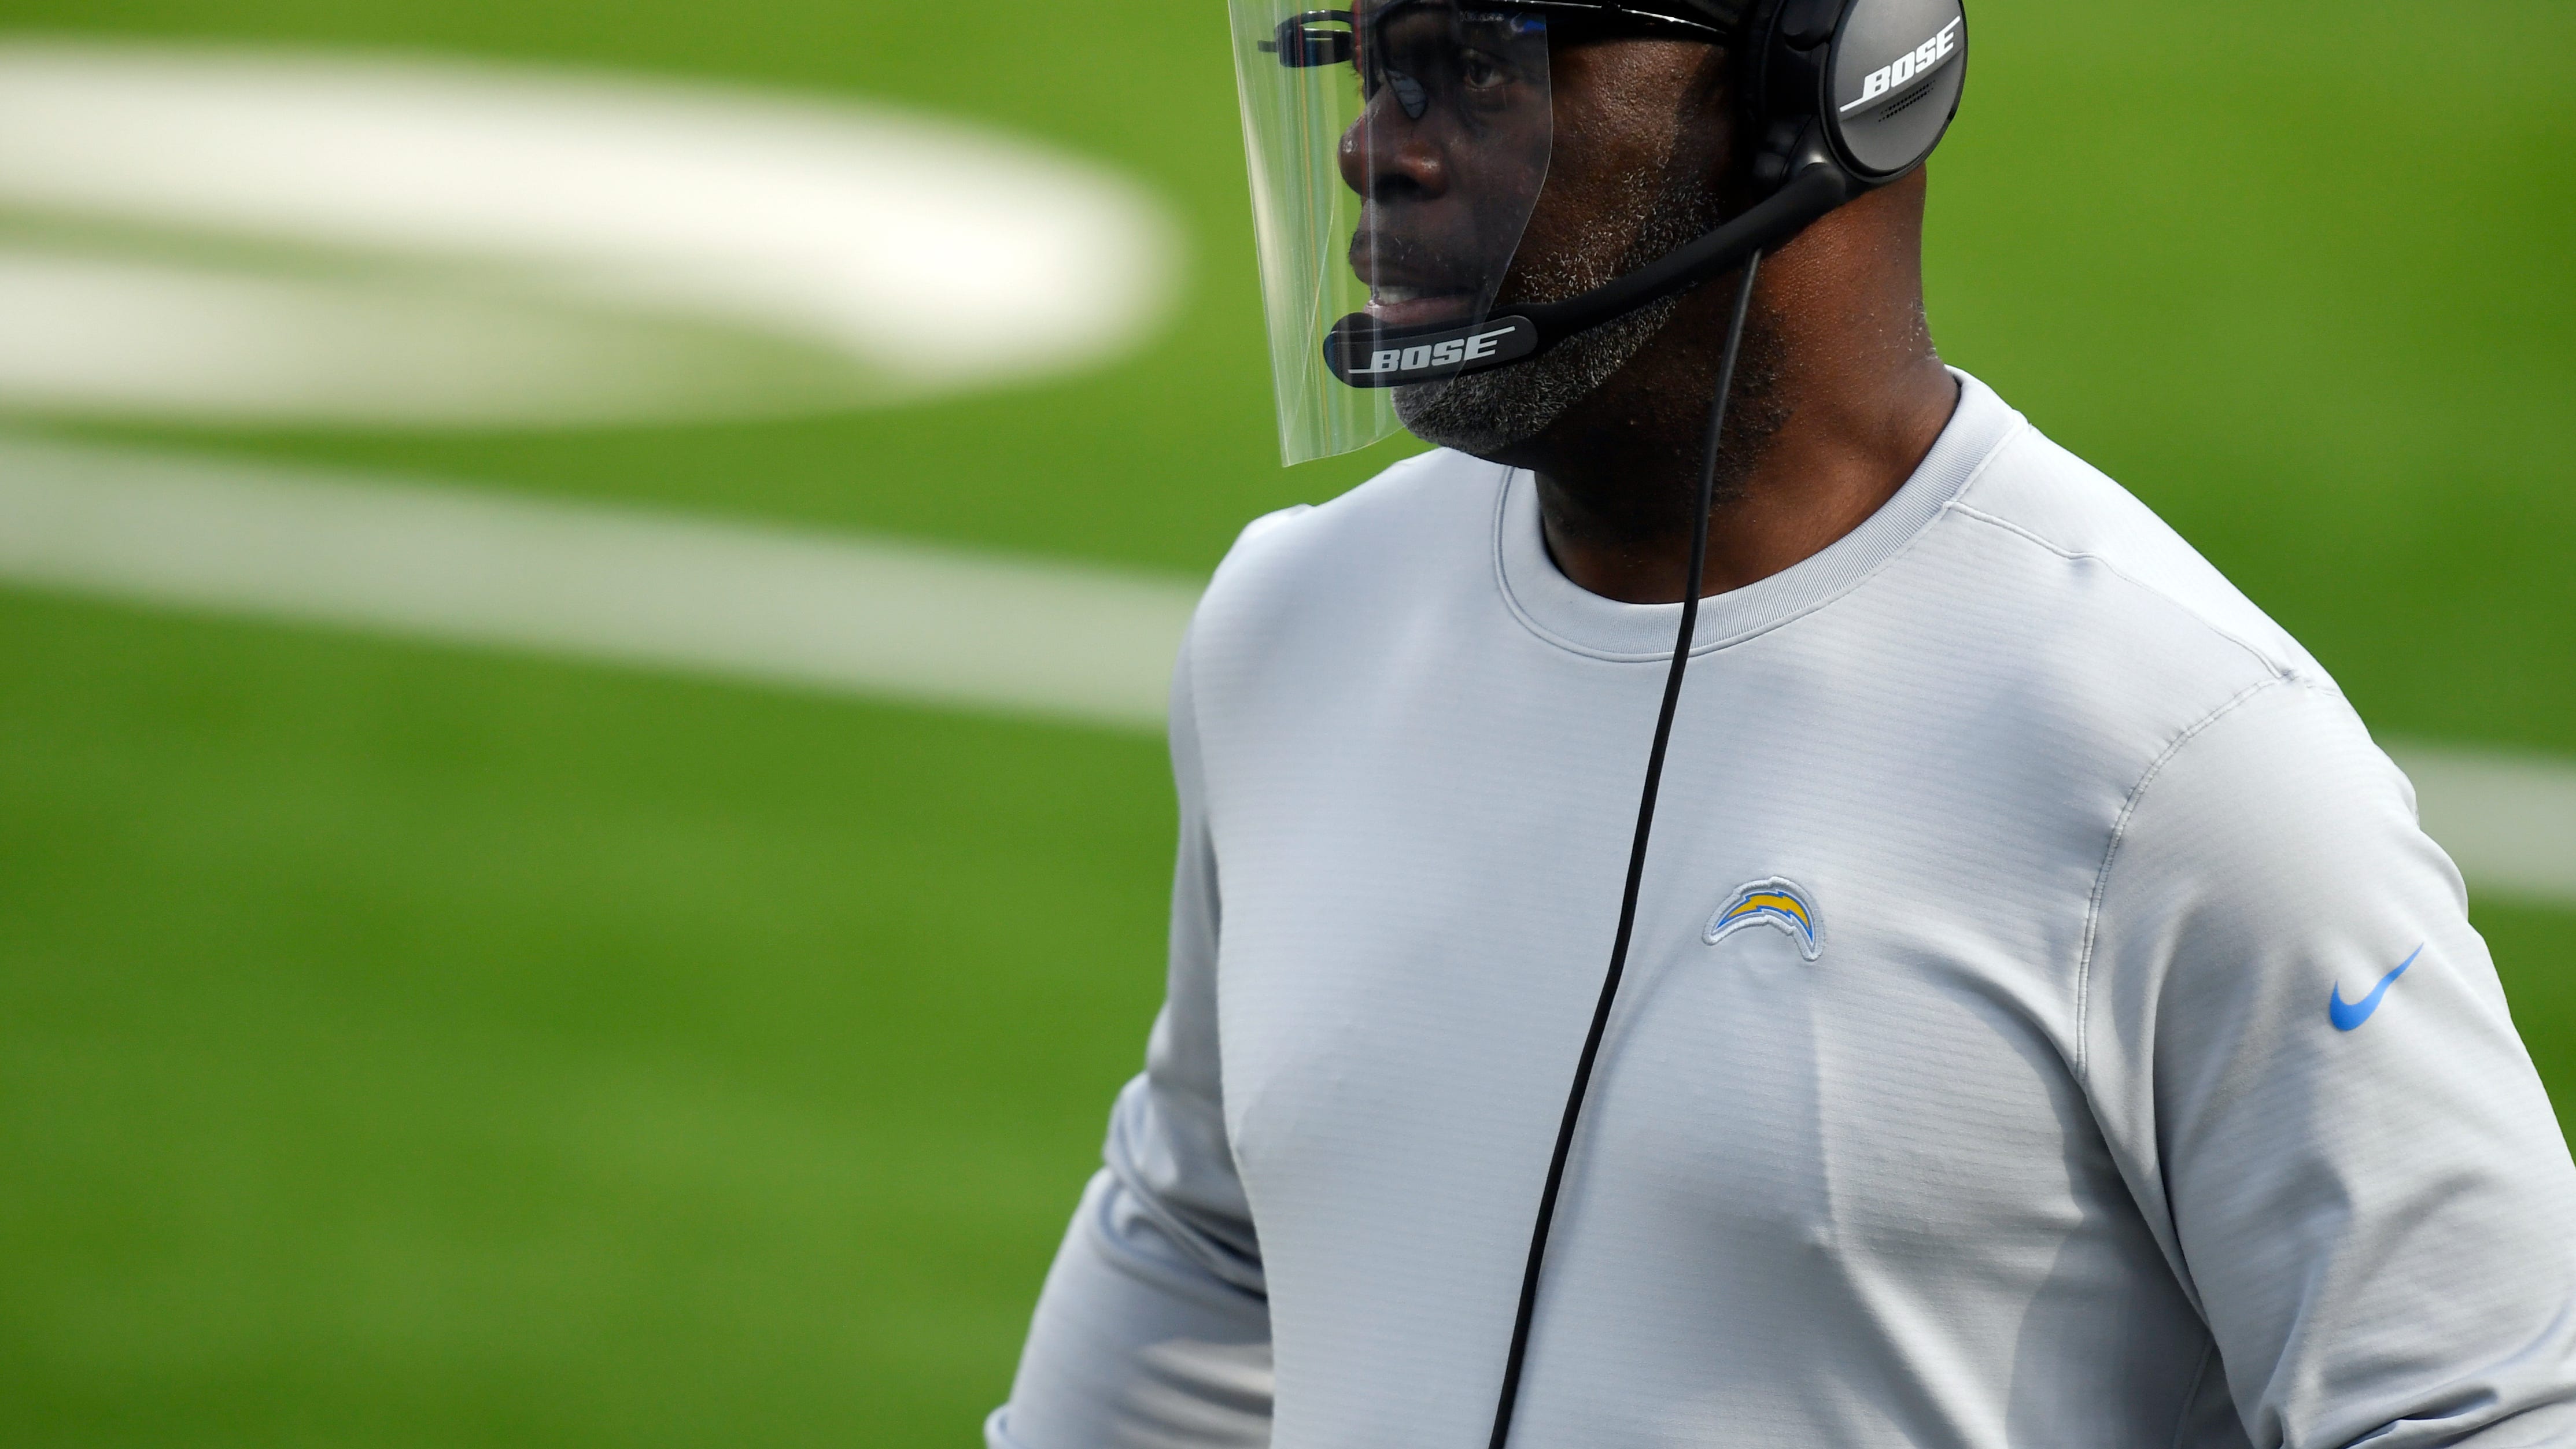 Los Angeles Chargers head coach Anthony Lynn looks on from the sideline during the first half of an NFL football game against the New York Jets Sunday, Nov. 22, 2020, in Inglewood, Calif. (AP Photo/Kyusung Gong)